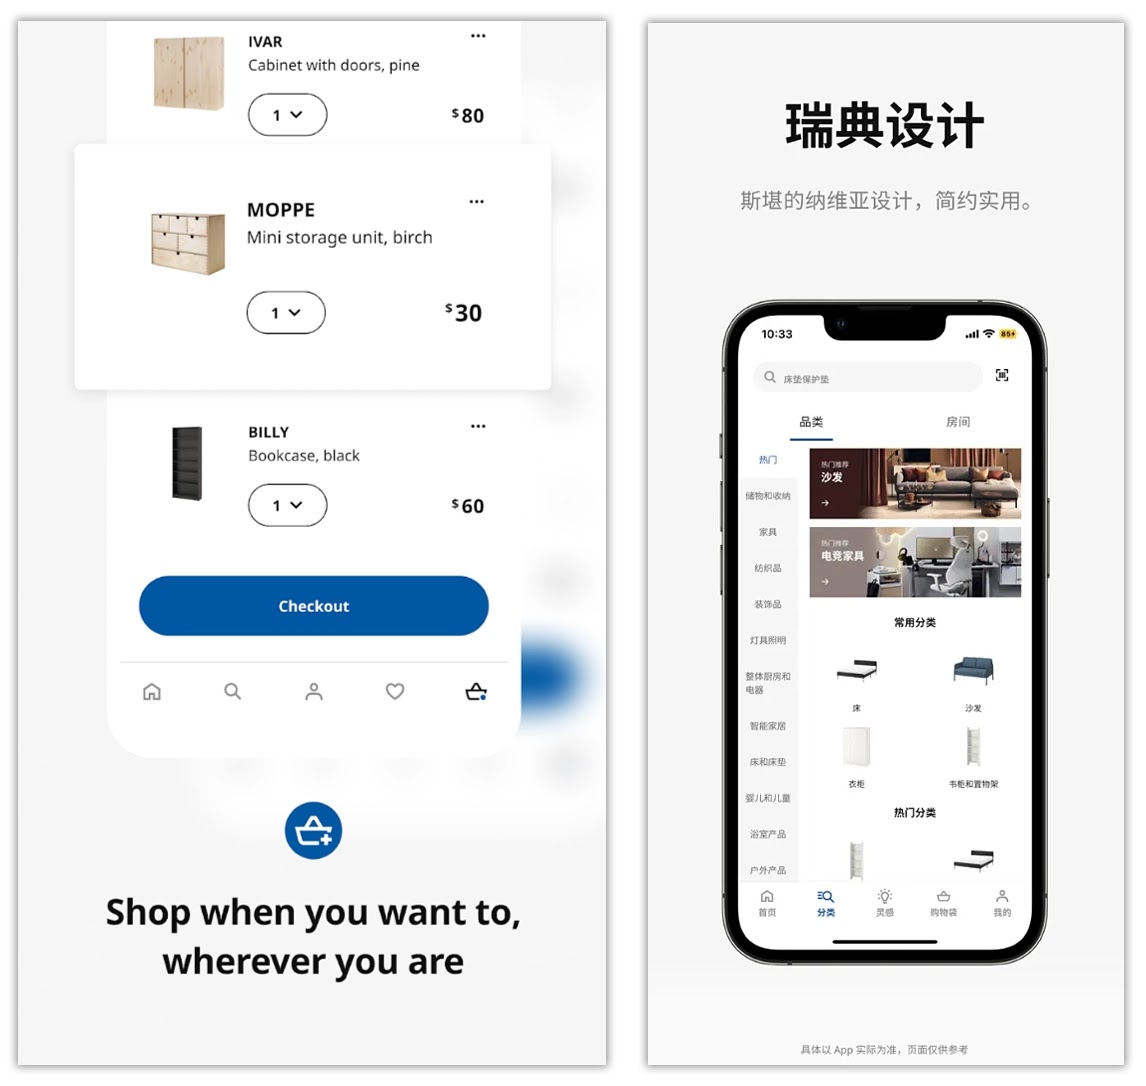 IKEA's app products in English (left) and Chinese (right)